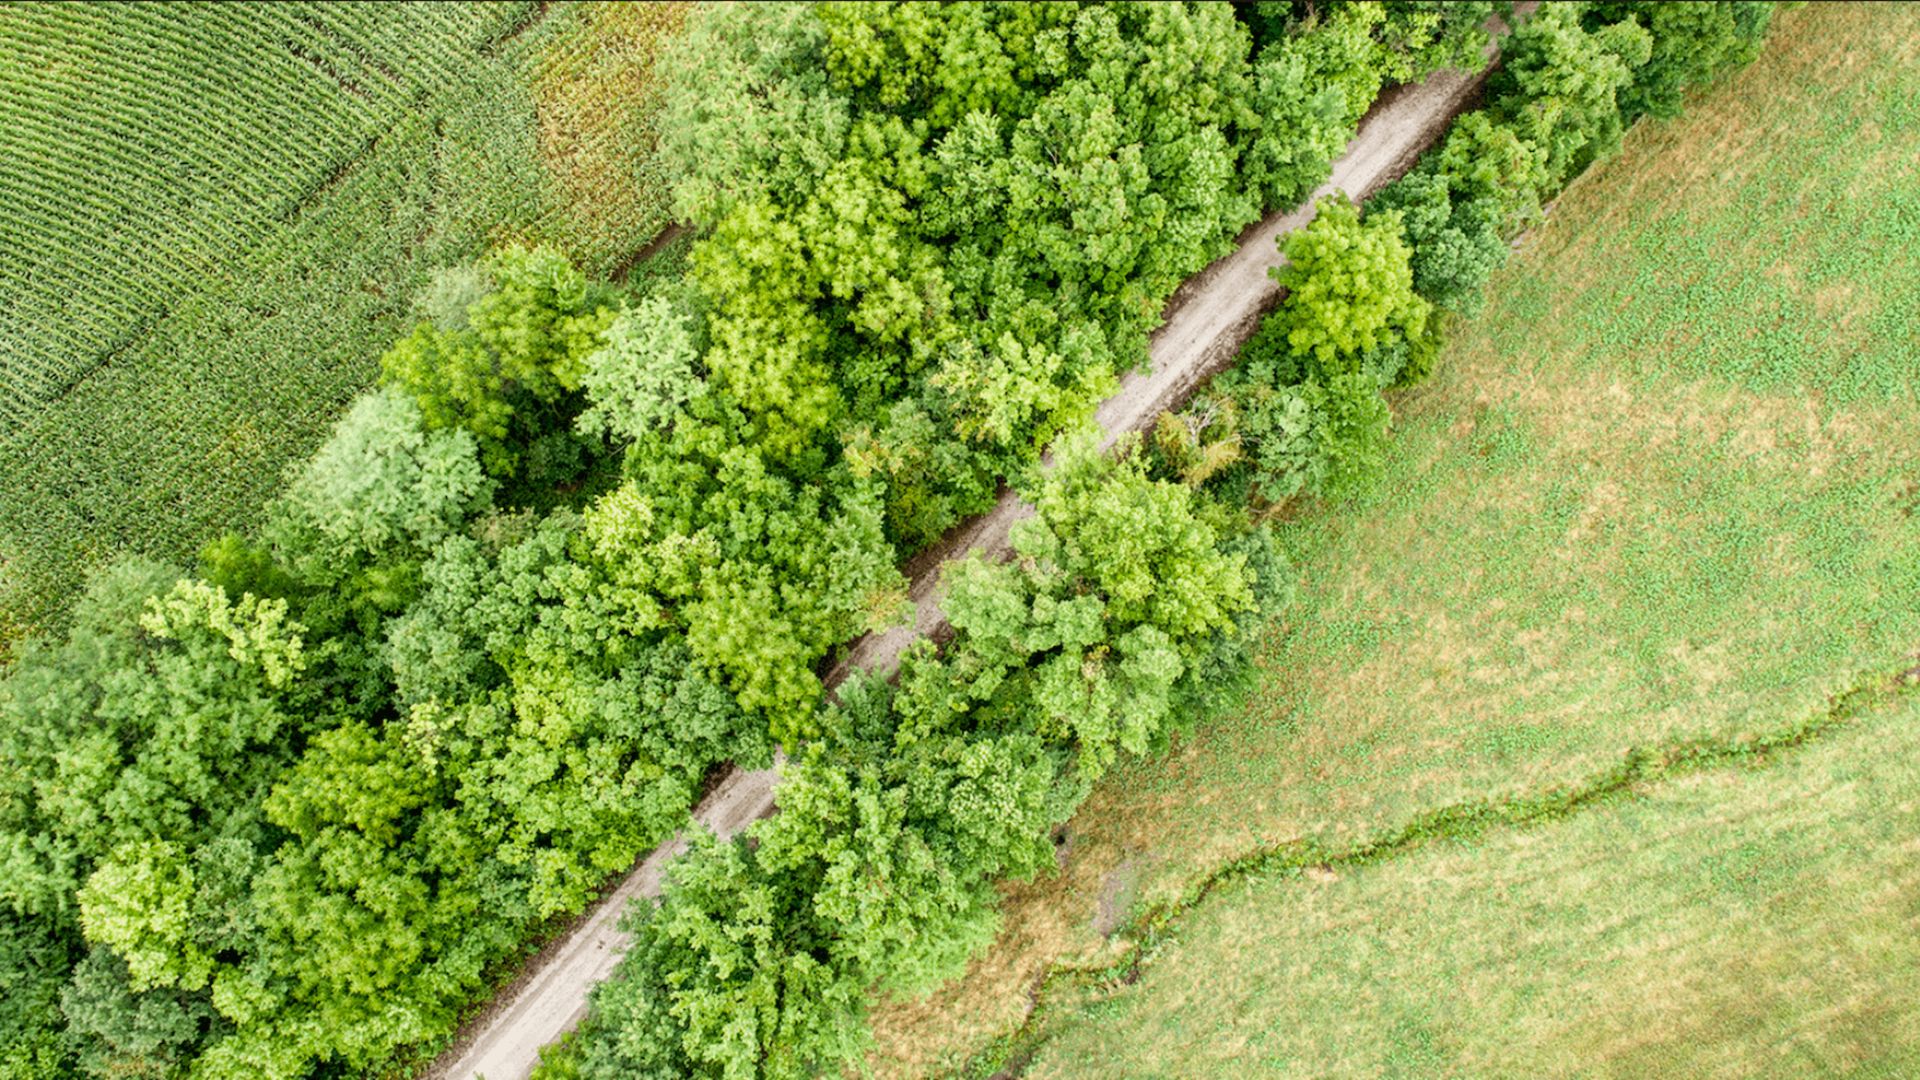 Aerial view of the Katy Trail surrounded by lush green trees